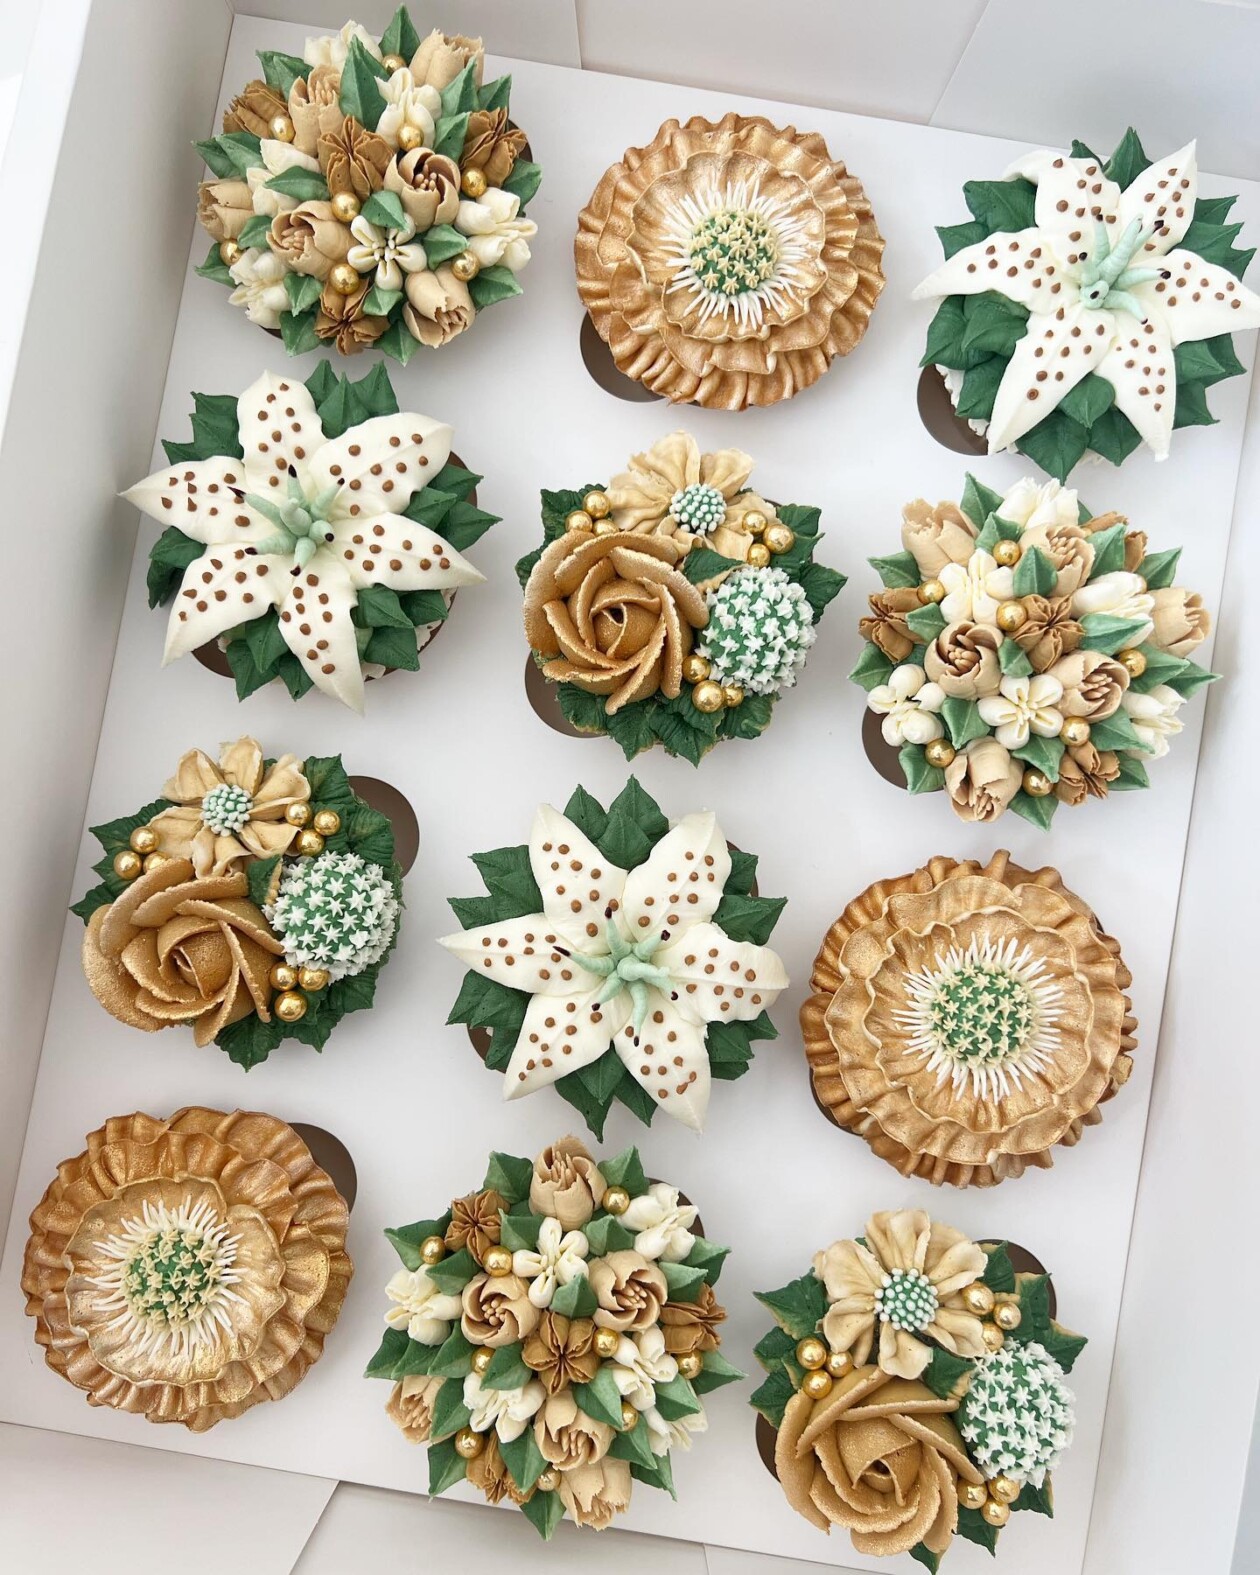 Gorgeous Cupcakes Decorated With Buttercream Flowers And Succulents By Kerry's Bouqcakes (7)